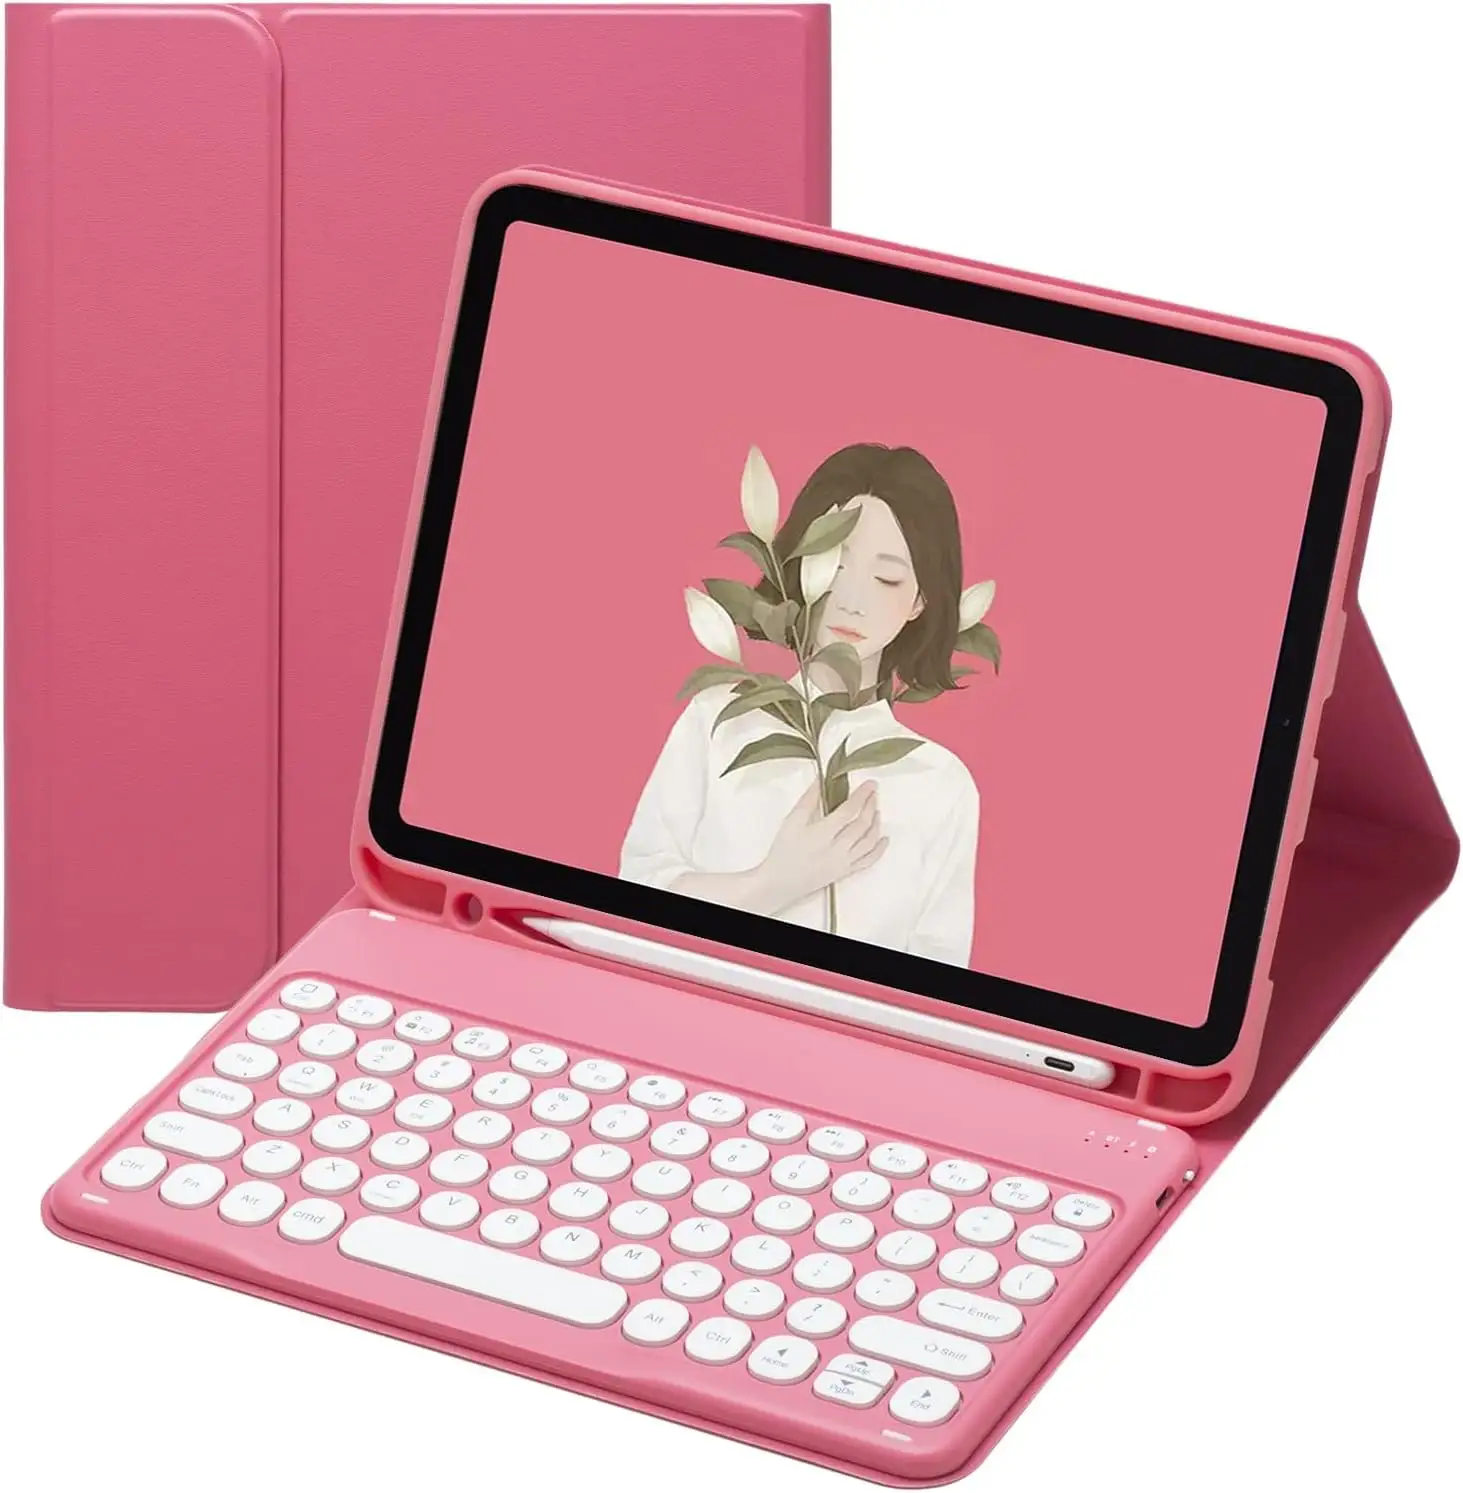 Wireless keyboard and mouse wireless keyboard cover suitable for iPad Air 4 5, 10.9 generation tablet case